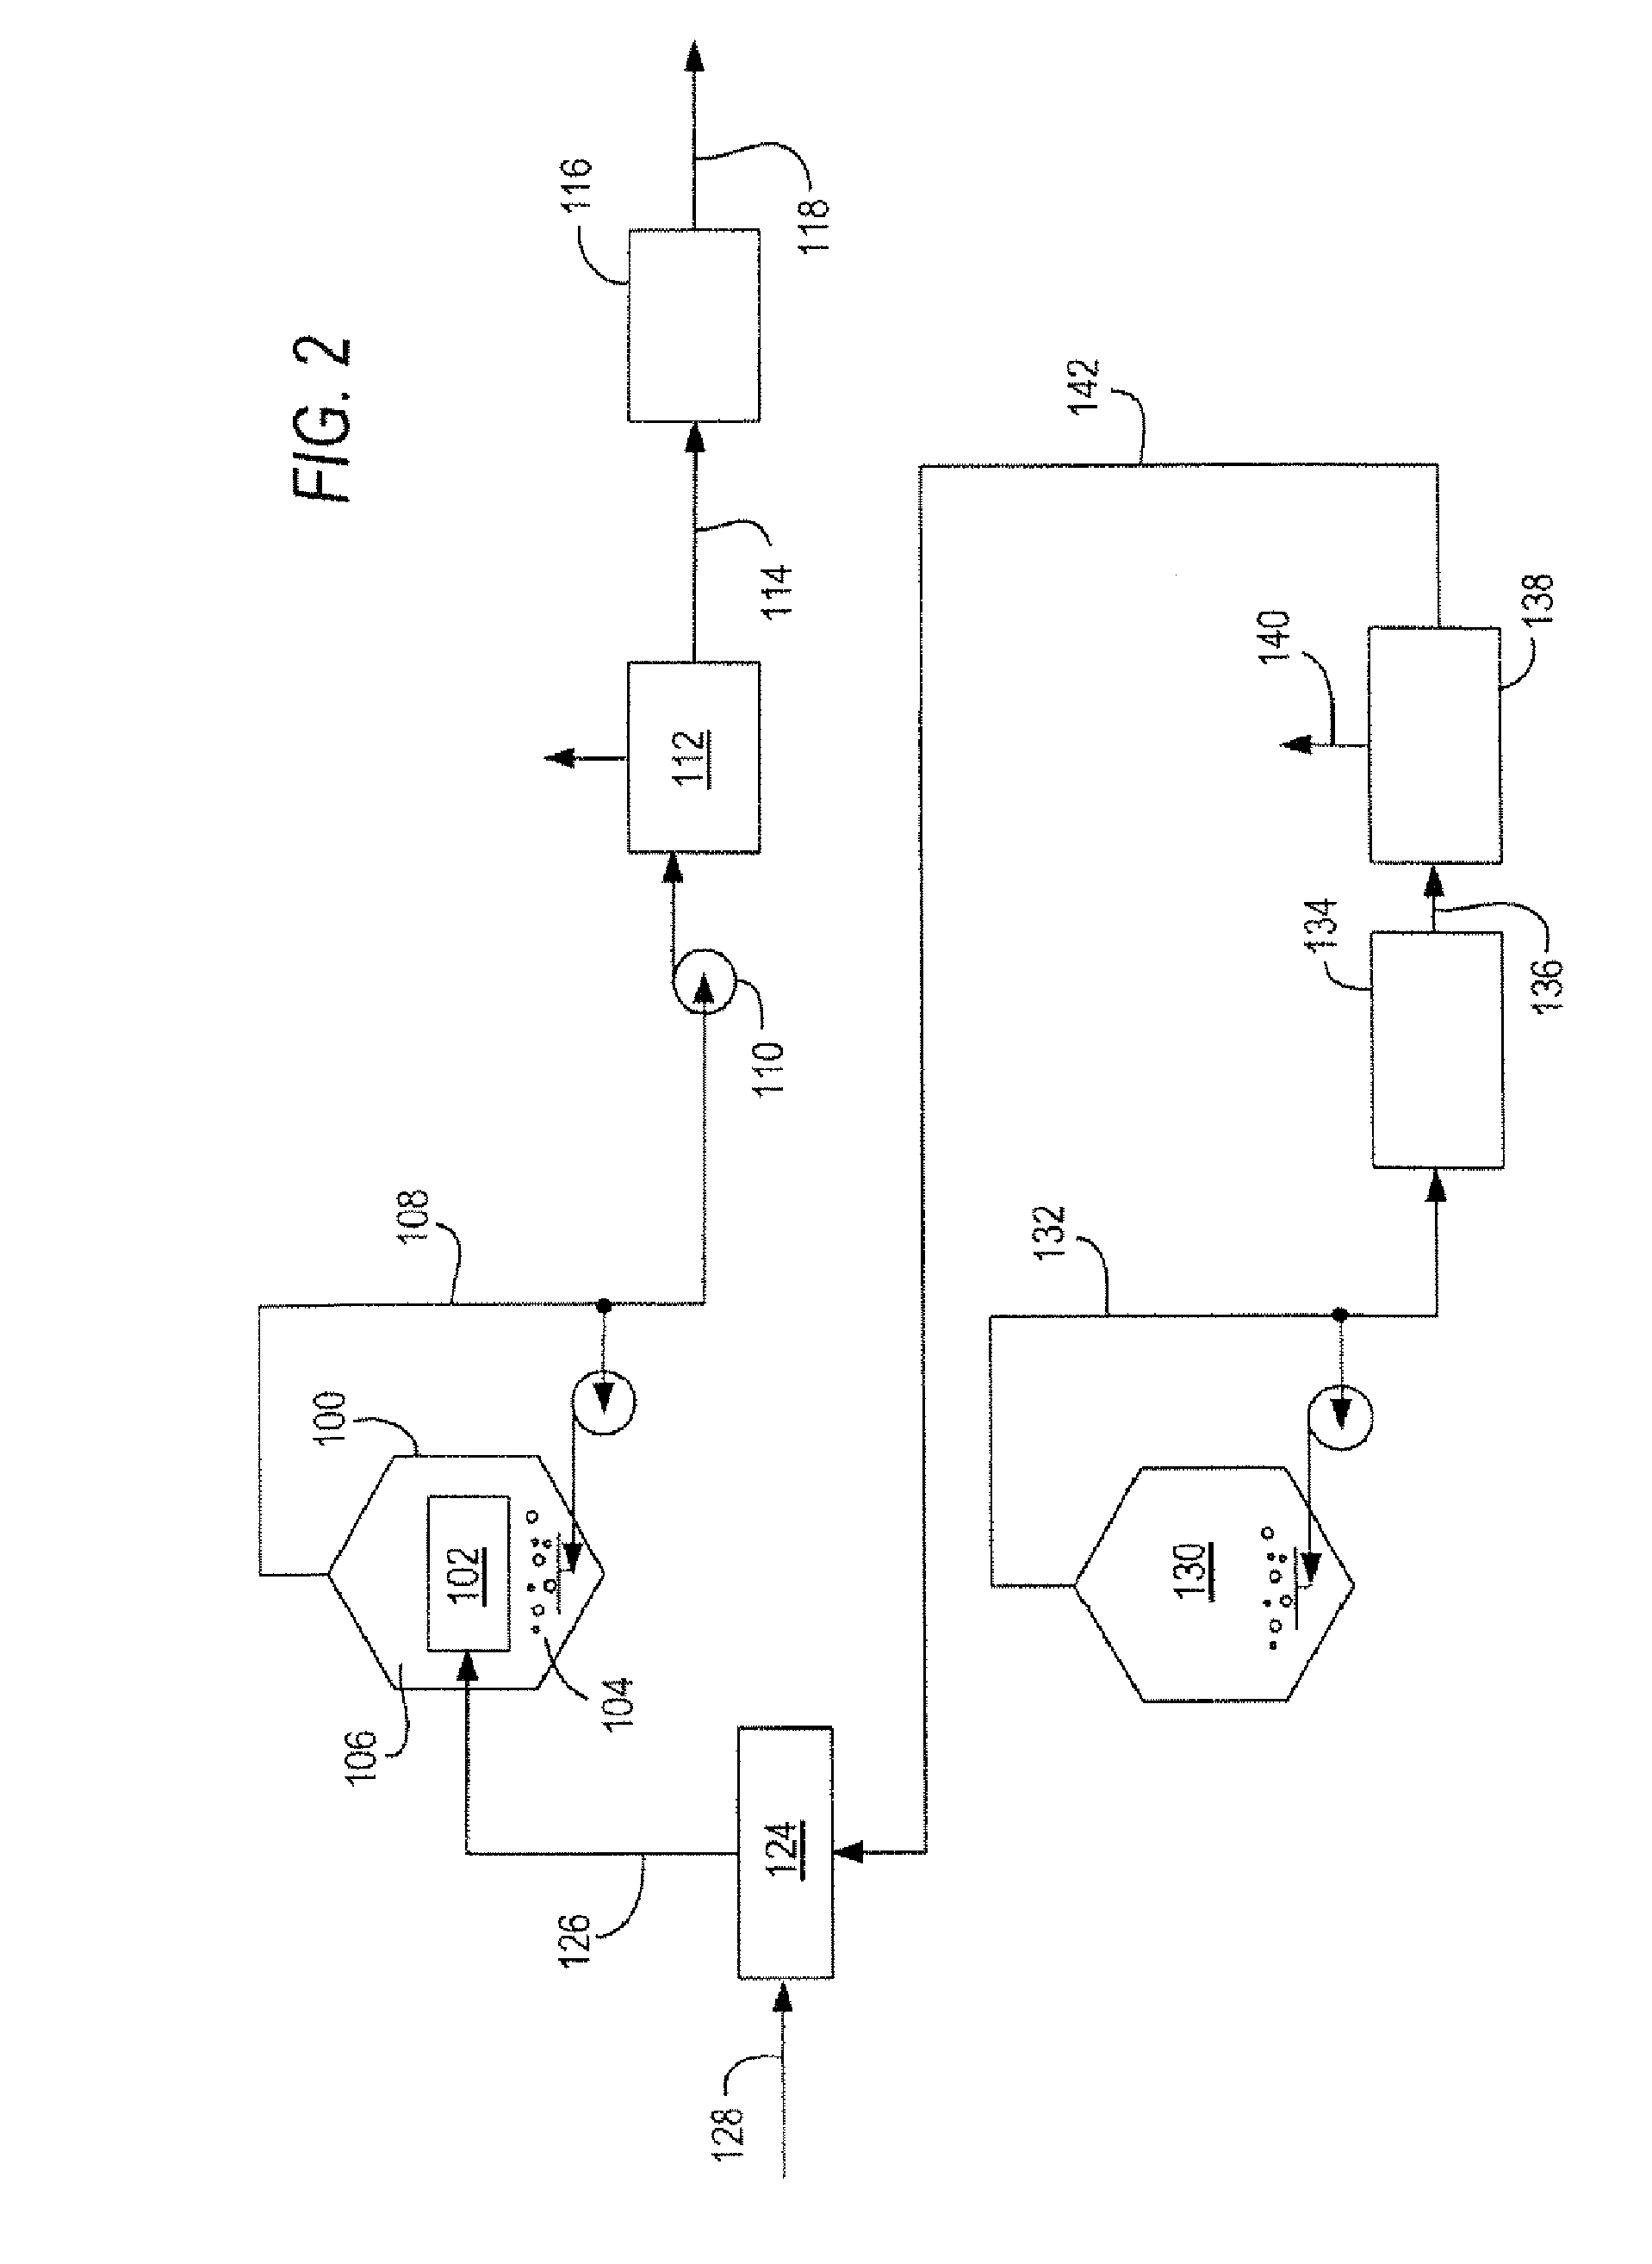 Process and apparatus for producing hydrogen from sewage sludge